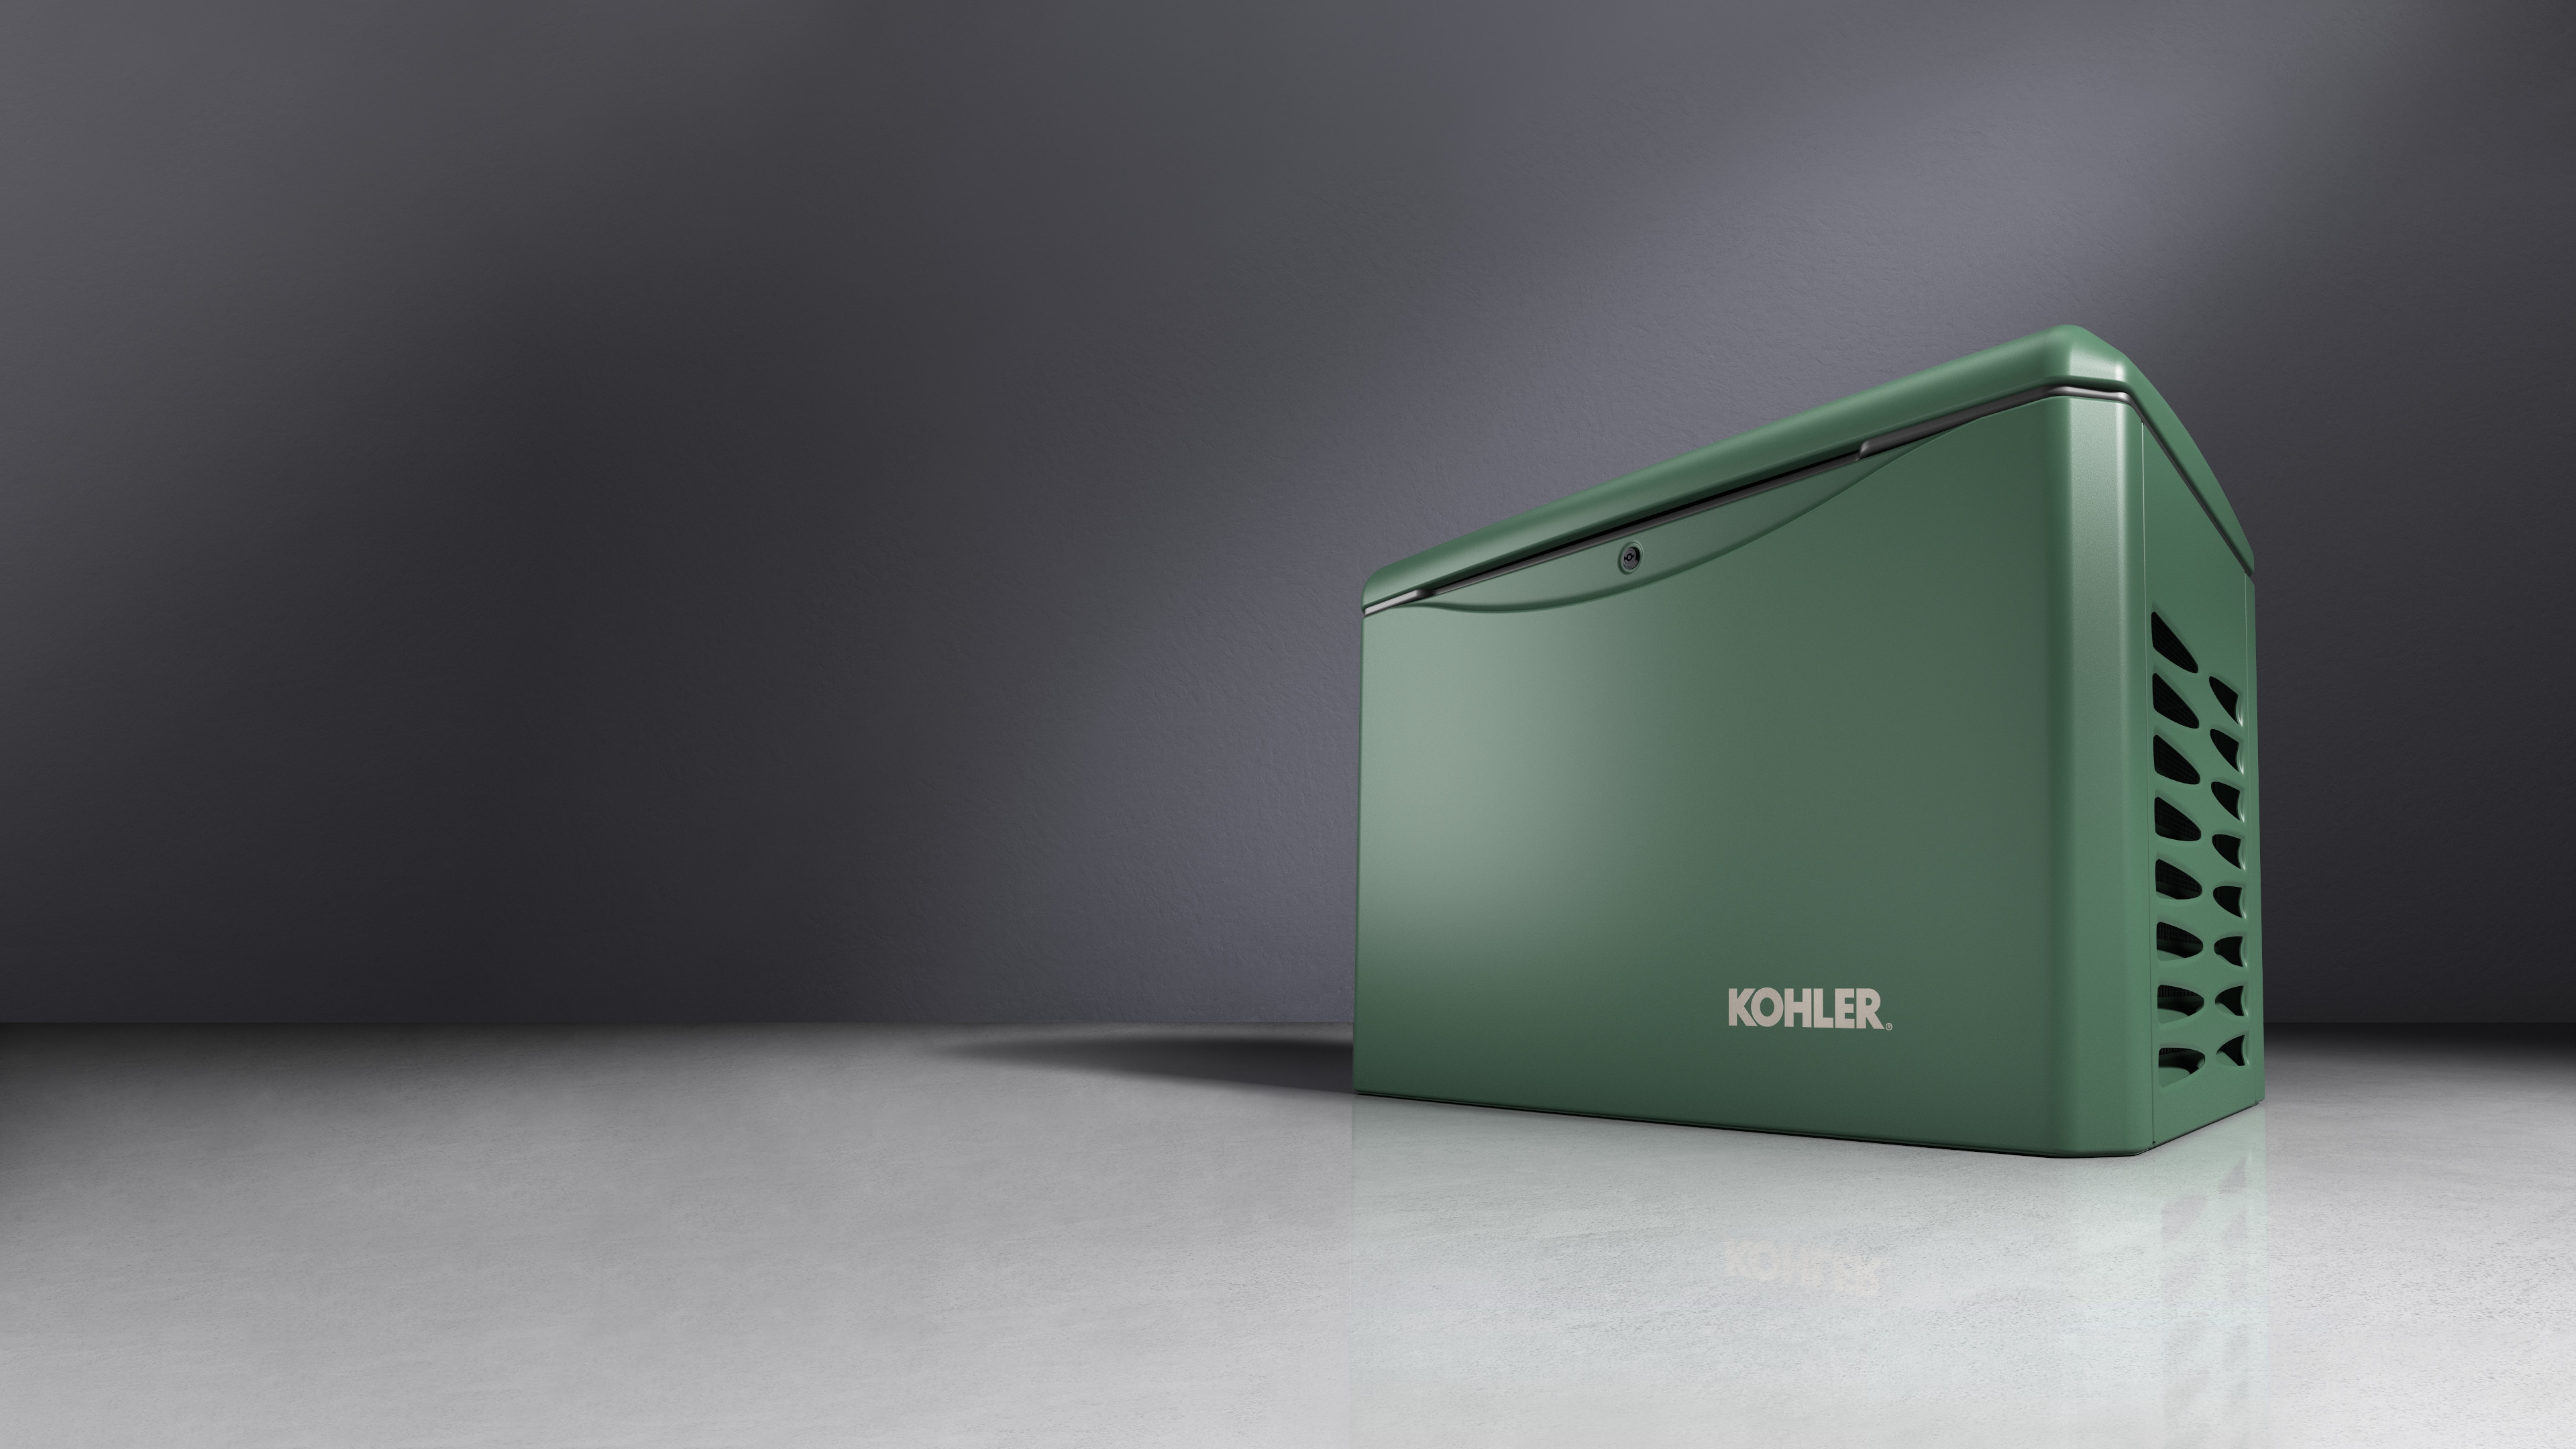 Royal Hunter Green color Kohler residential generator with ventilated side panels, showcased against a gradient gray background.